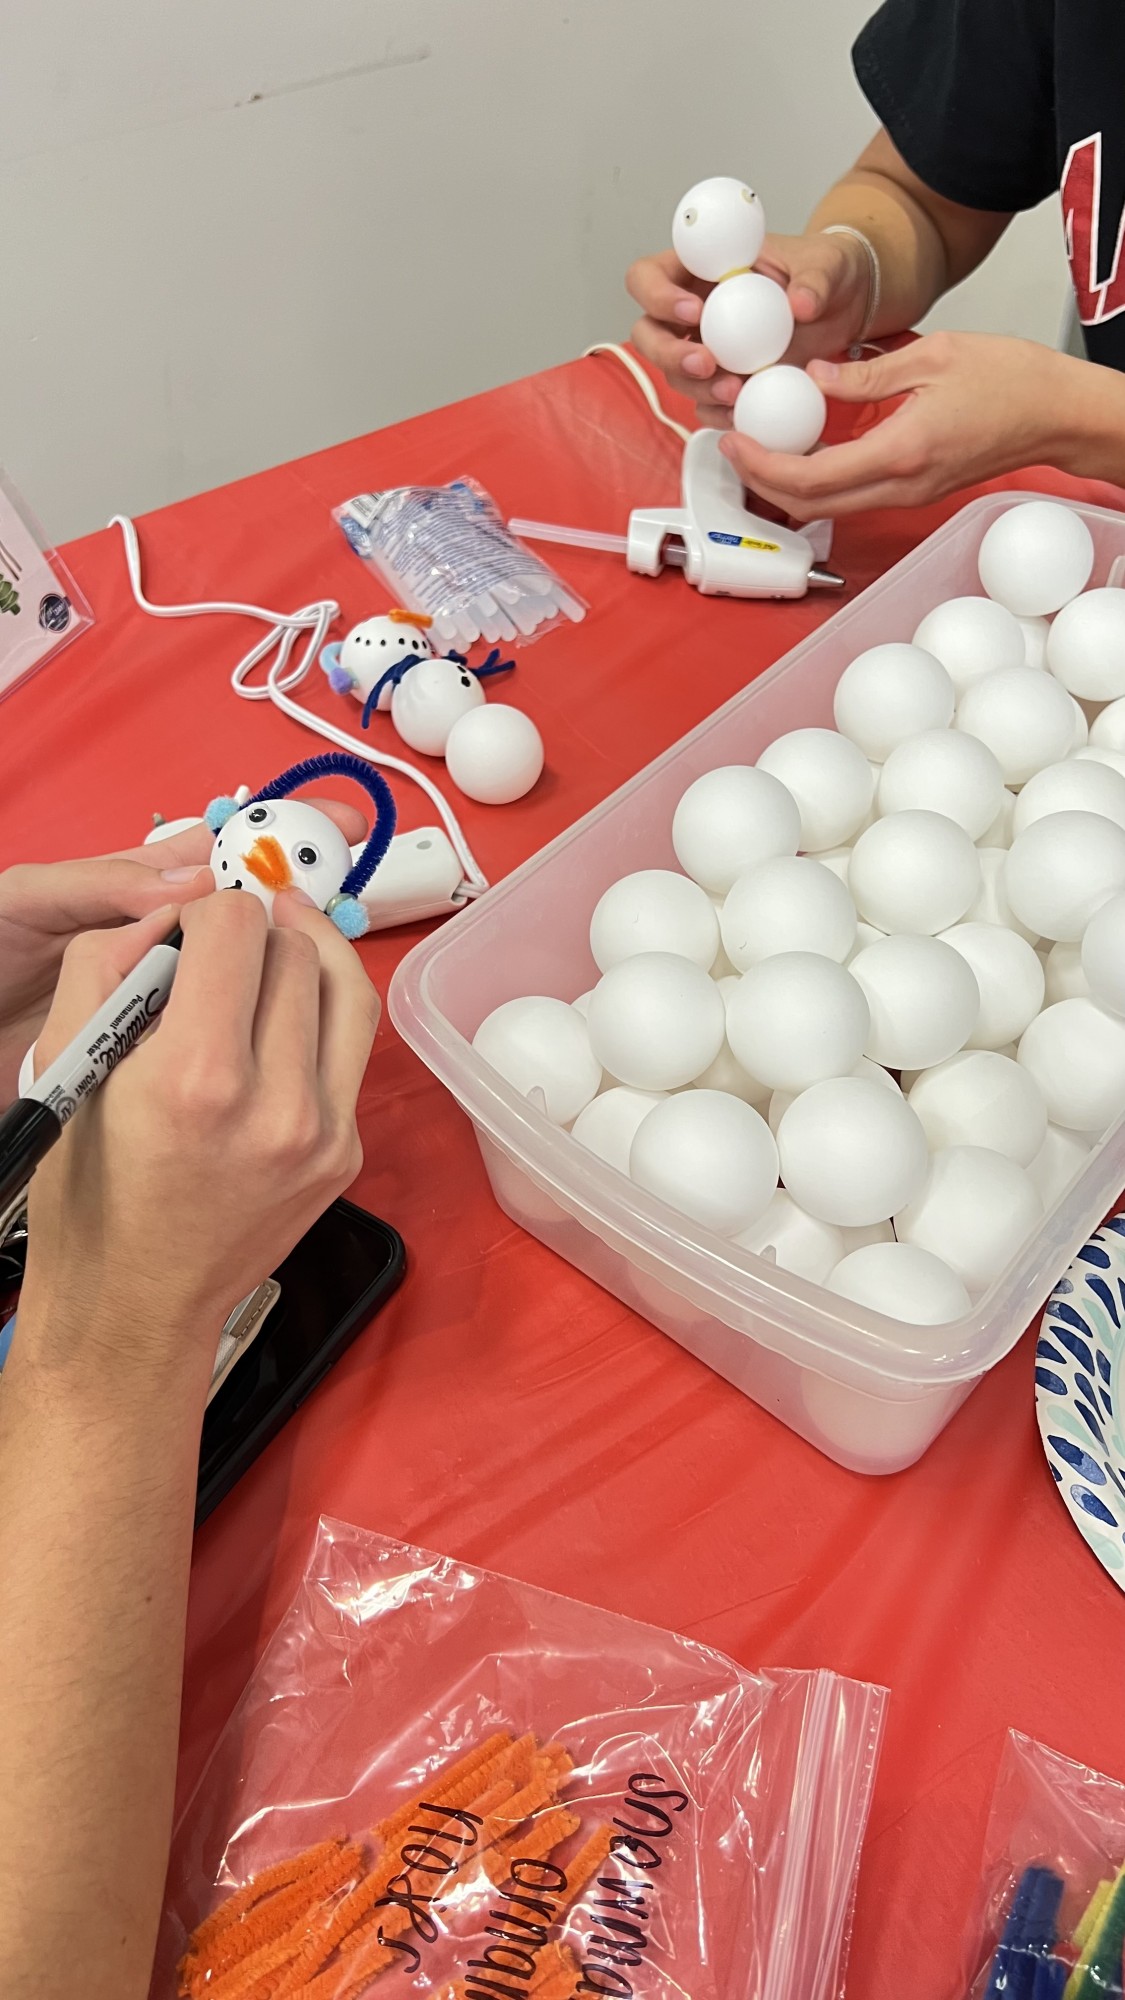 Students participate in making crafts that were offered at the Campus Recreation centers on the Fall 2022 Zen Day. (Courtesy Dan Blumenthal, assistant director of marketing and communications at Campus Recreation)
